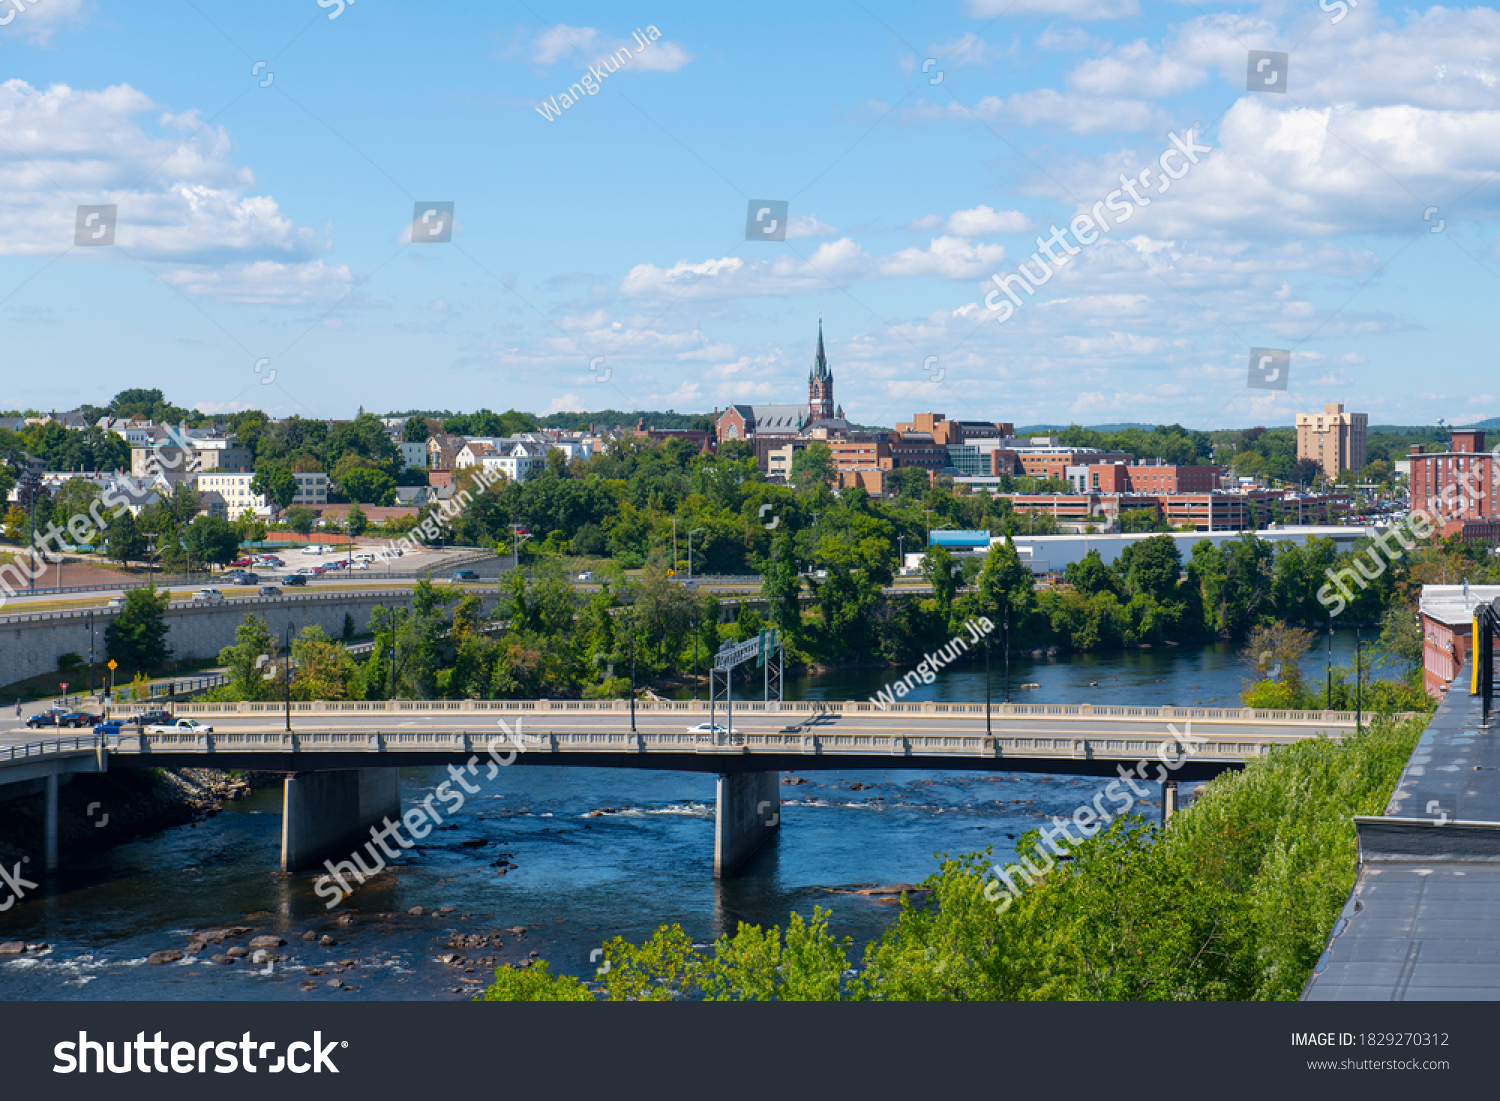 Manchester historic city skyline including Merrimack River, Granite Street Bridge and West Side Sainte Marie Parish church in Manchester, New Hampshire NH, USA.  #1829270312